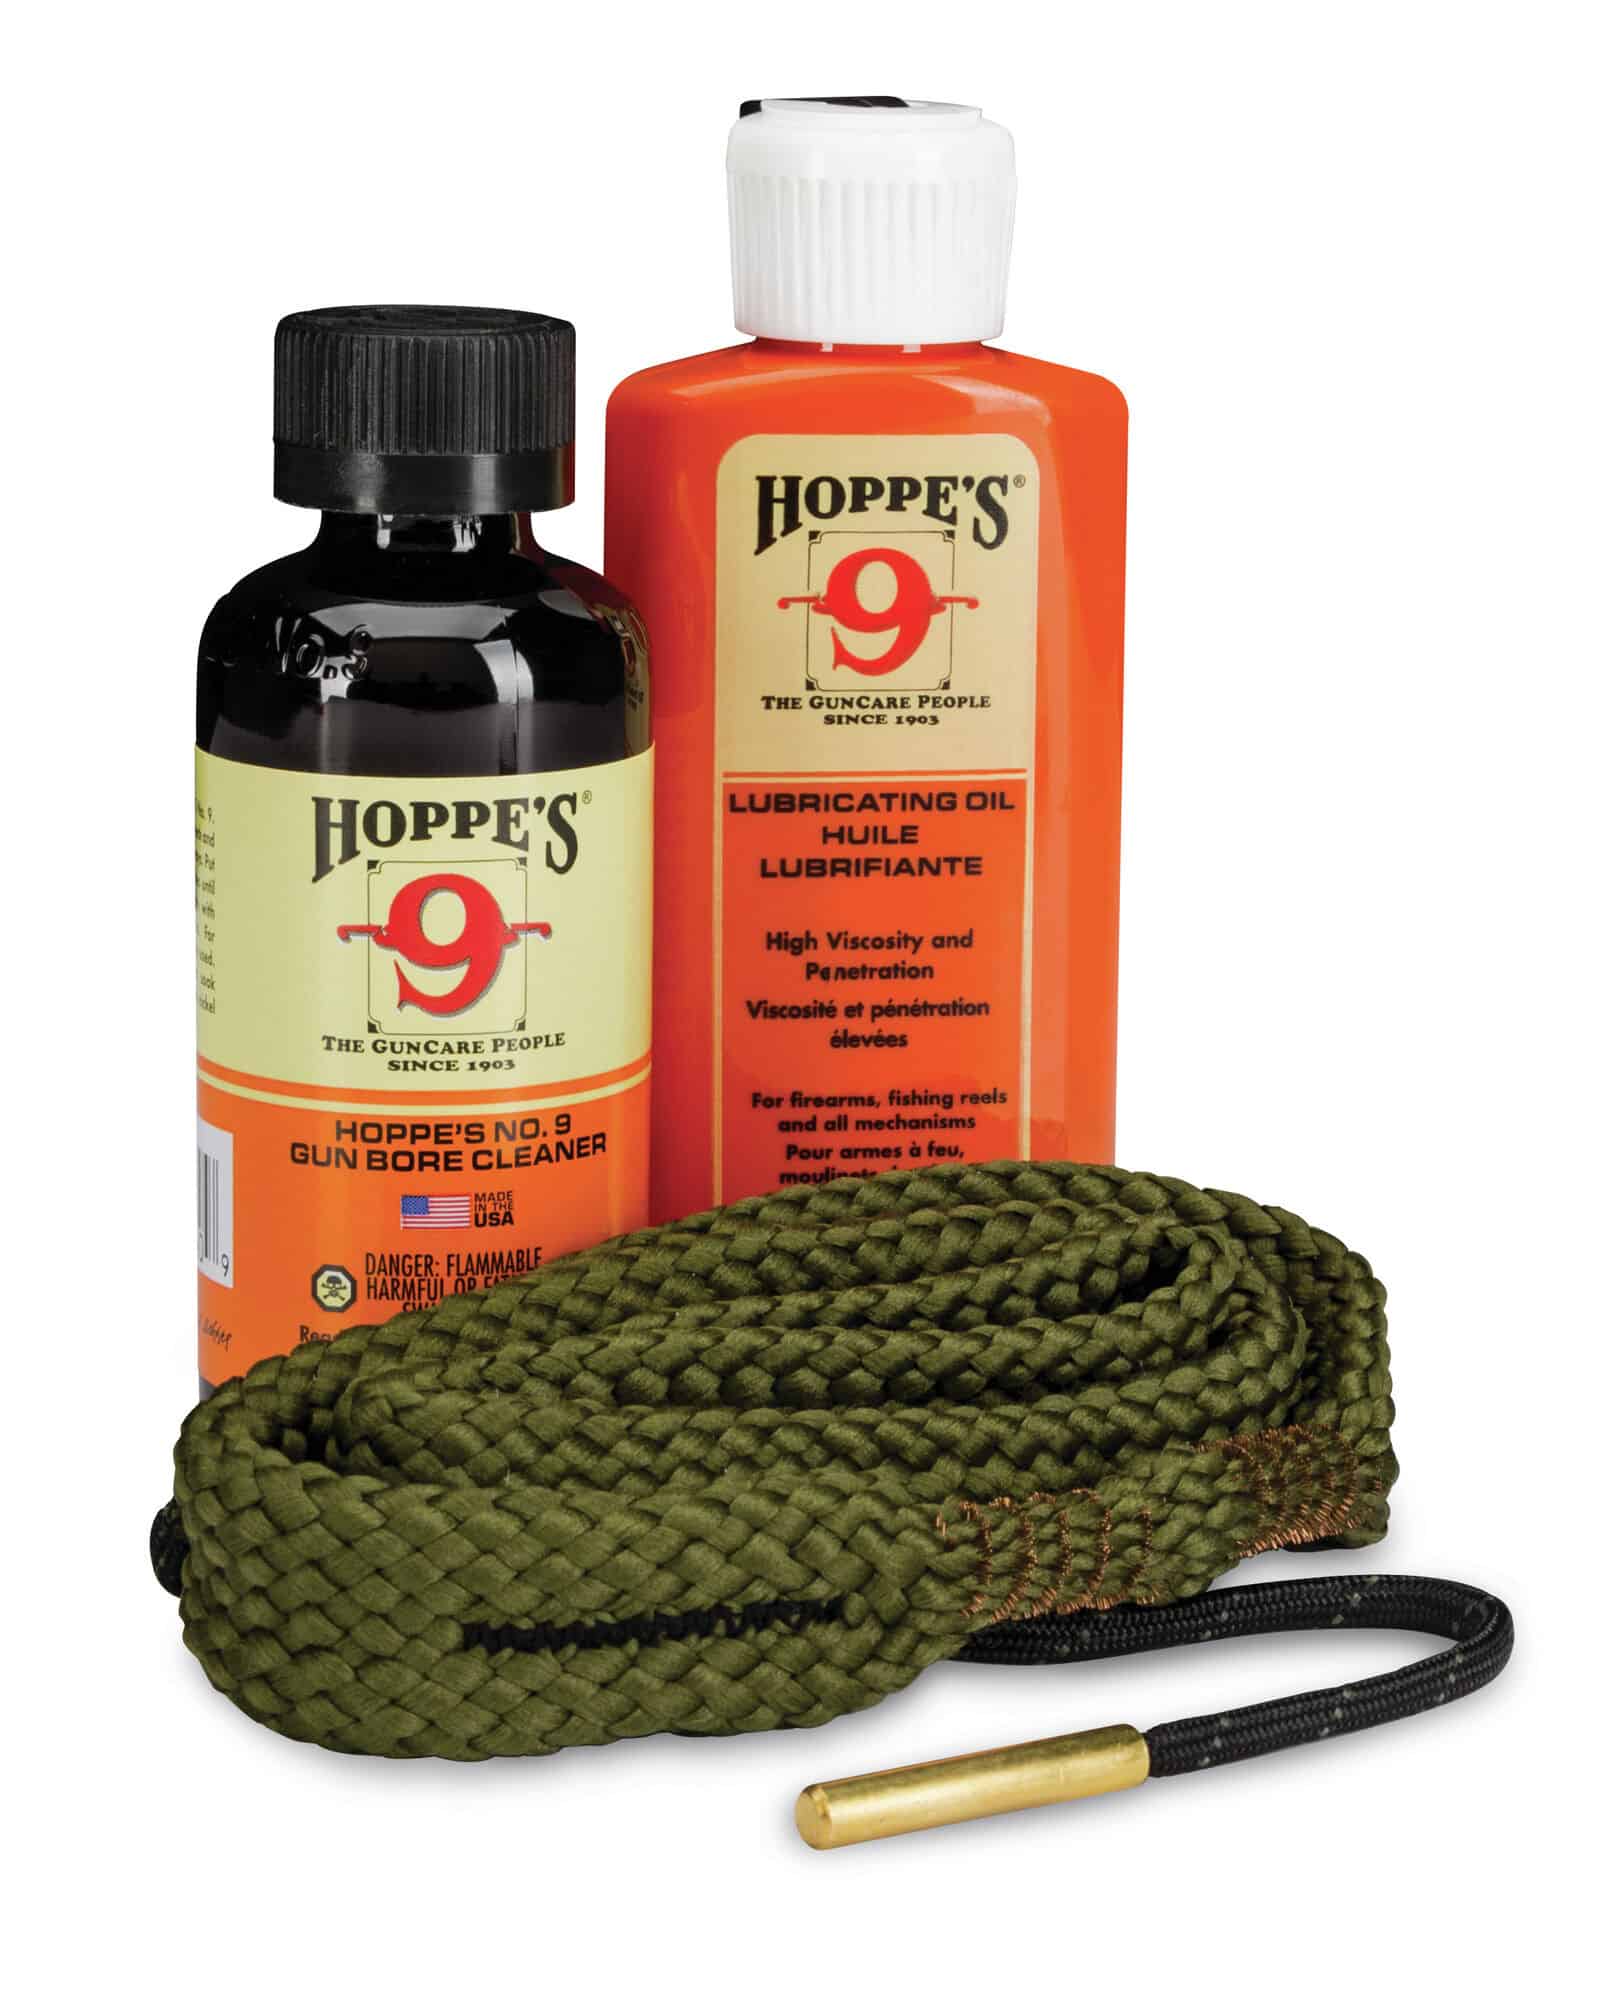 Cleaning Kit including Oil, cleaner, and bore snake